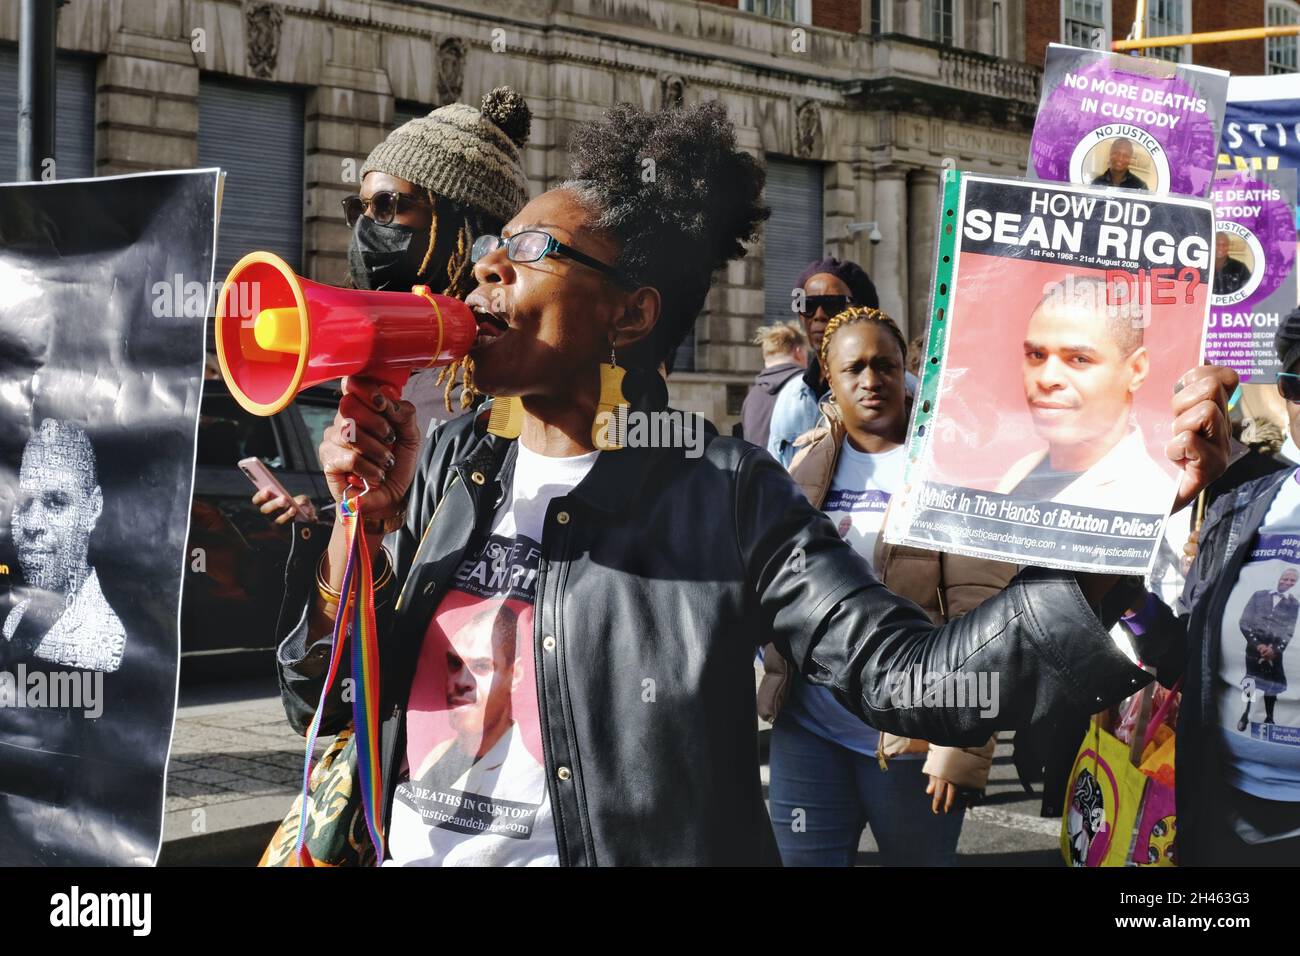 London, UK. Marcia Rigg the chair of the United Friends & Family Campaign leads the annual march for those who died in police custody or prison. Stock Photo